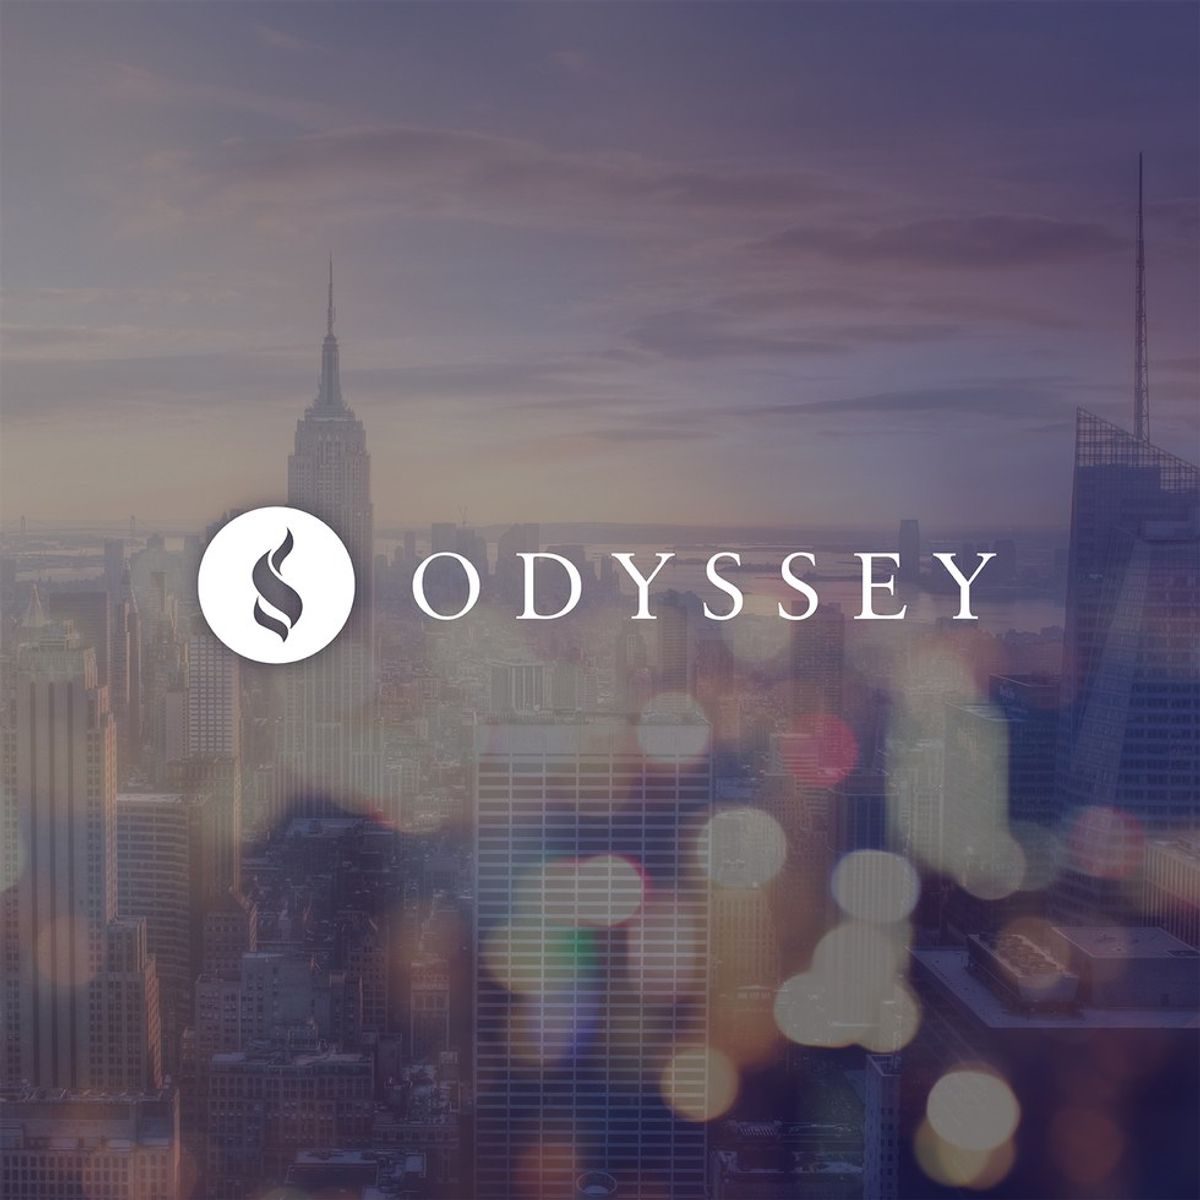 The Best of "Odyssey Rejects"